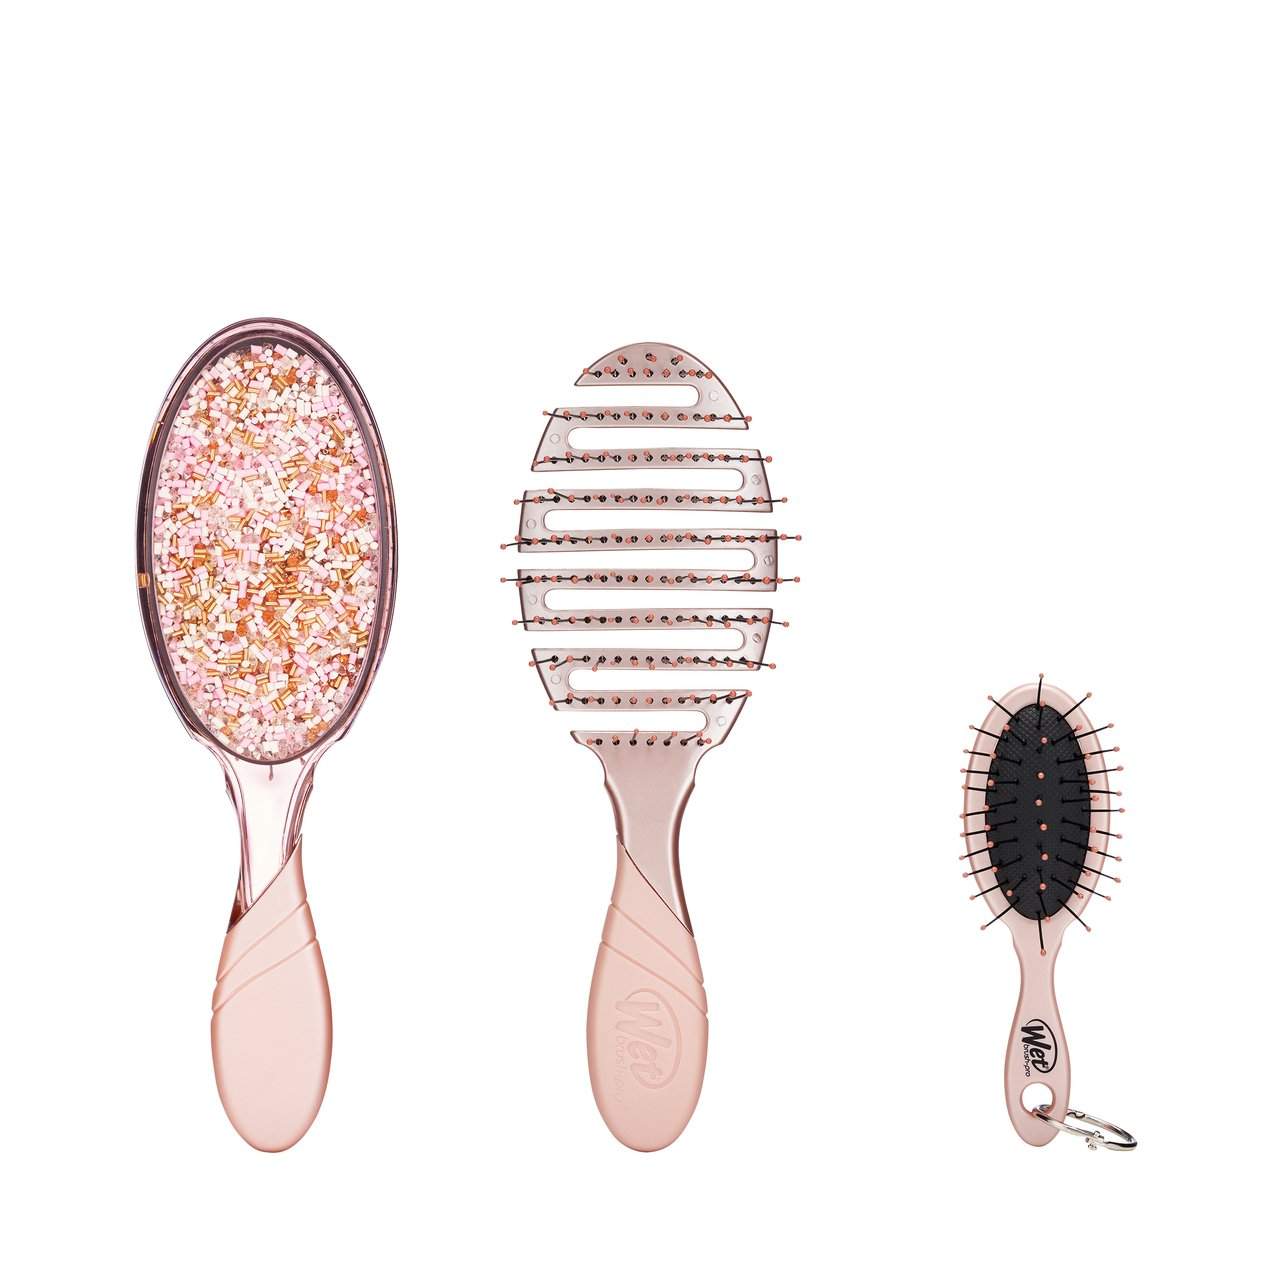 Wet Brush Glistening Glamour Kit-Wet Brush-Brand_Wet Brush,Collection_Gifts,Collection_Hair,Collection_Tools and Brushes,Gifts and Sets,Gifts_Under 25,Tool_Brushes,Tool_Detangling Brush,Tool_Hair Tools,Tool_Vented Brushes,WET_Glitter Detanglers,WET_Kits and Sets